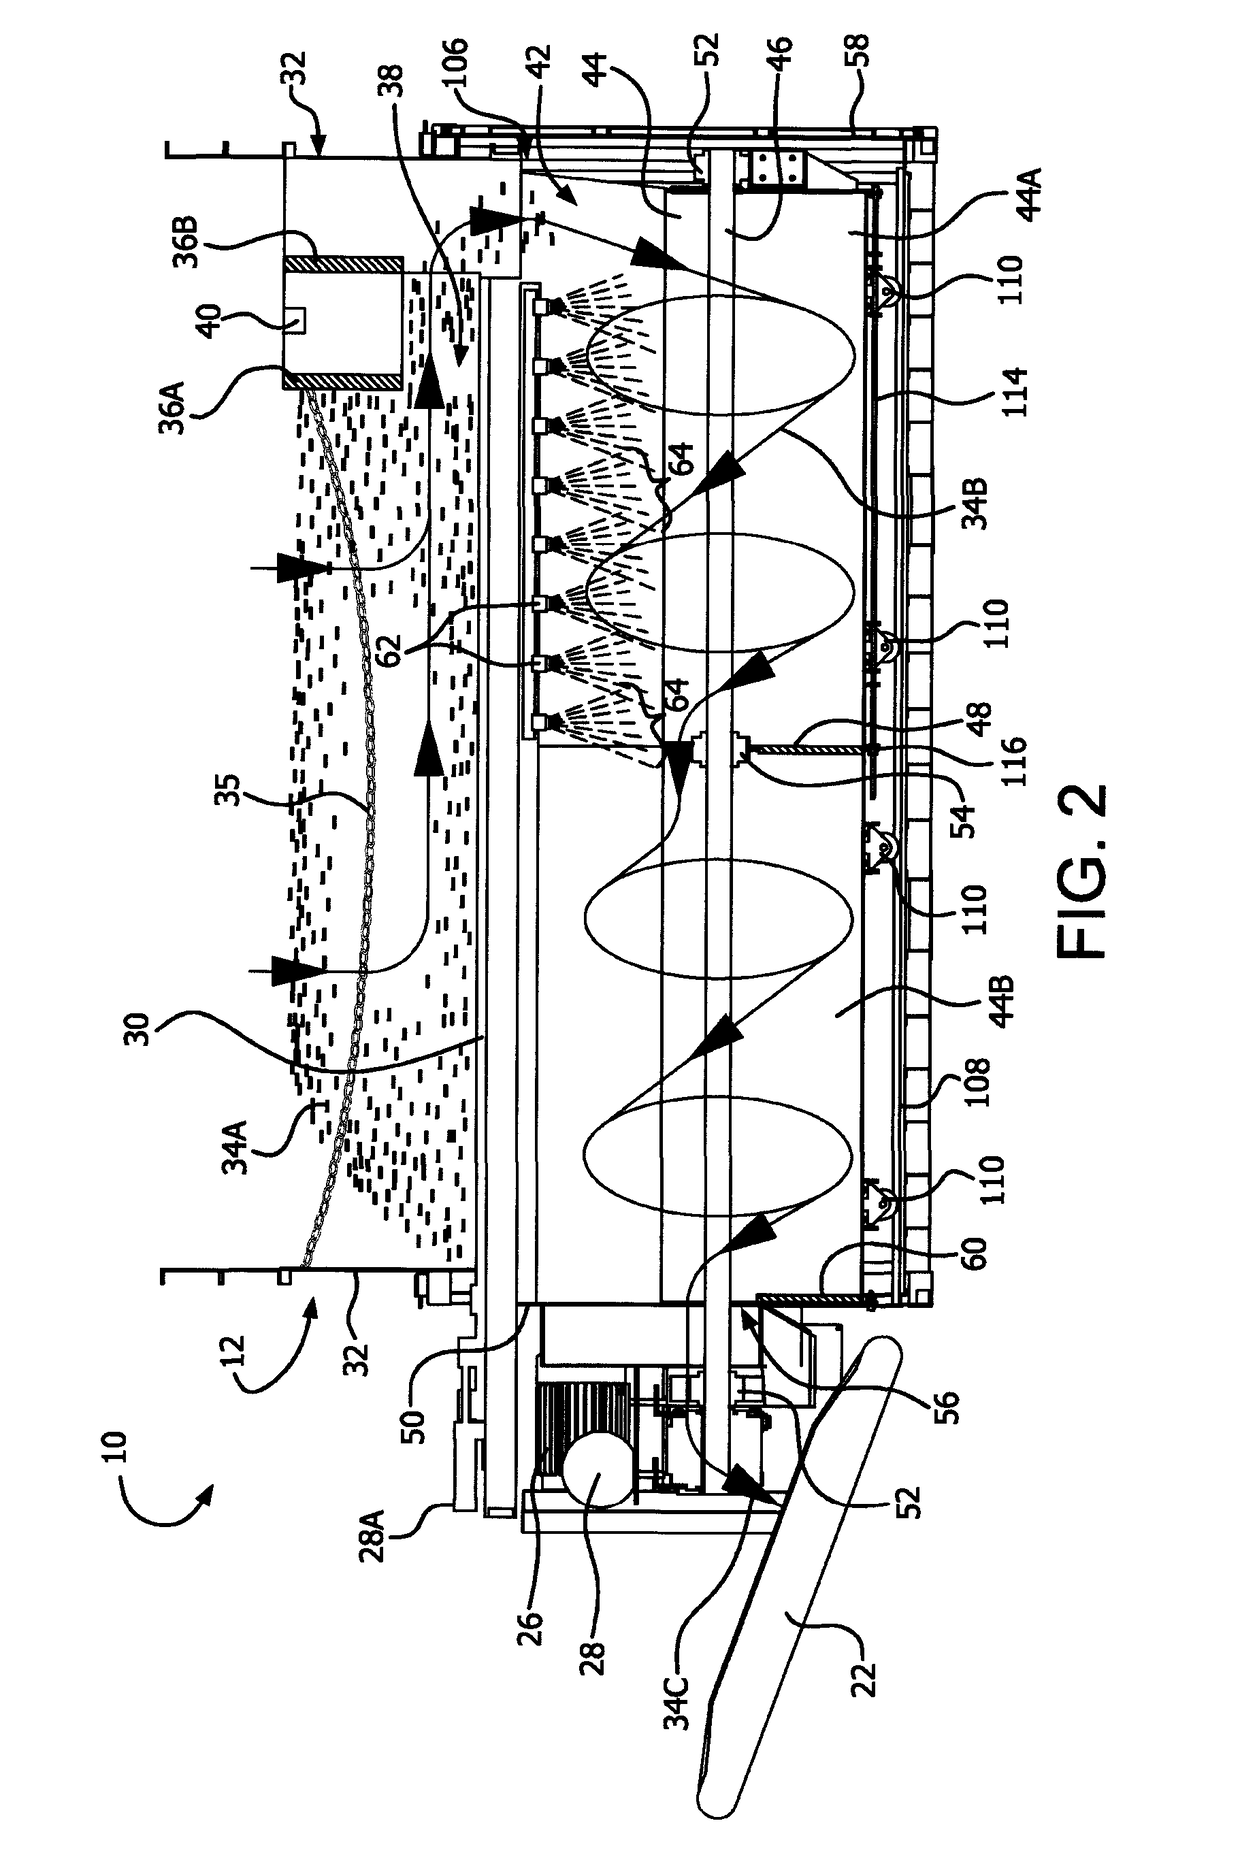 Apparatus and method for coating particulate material